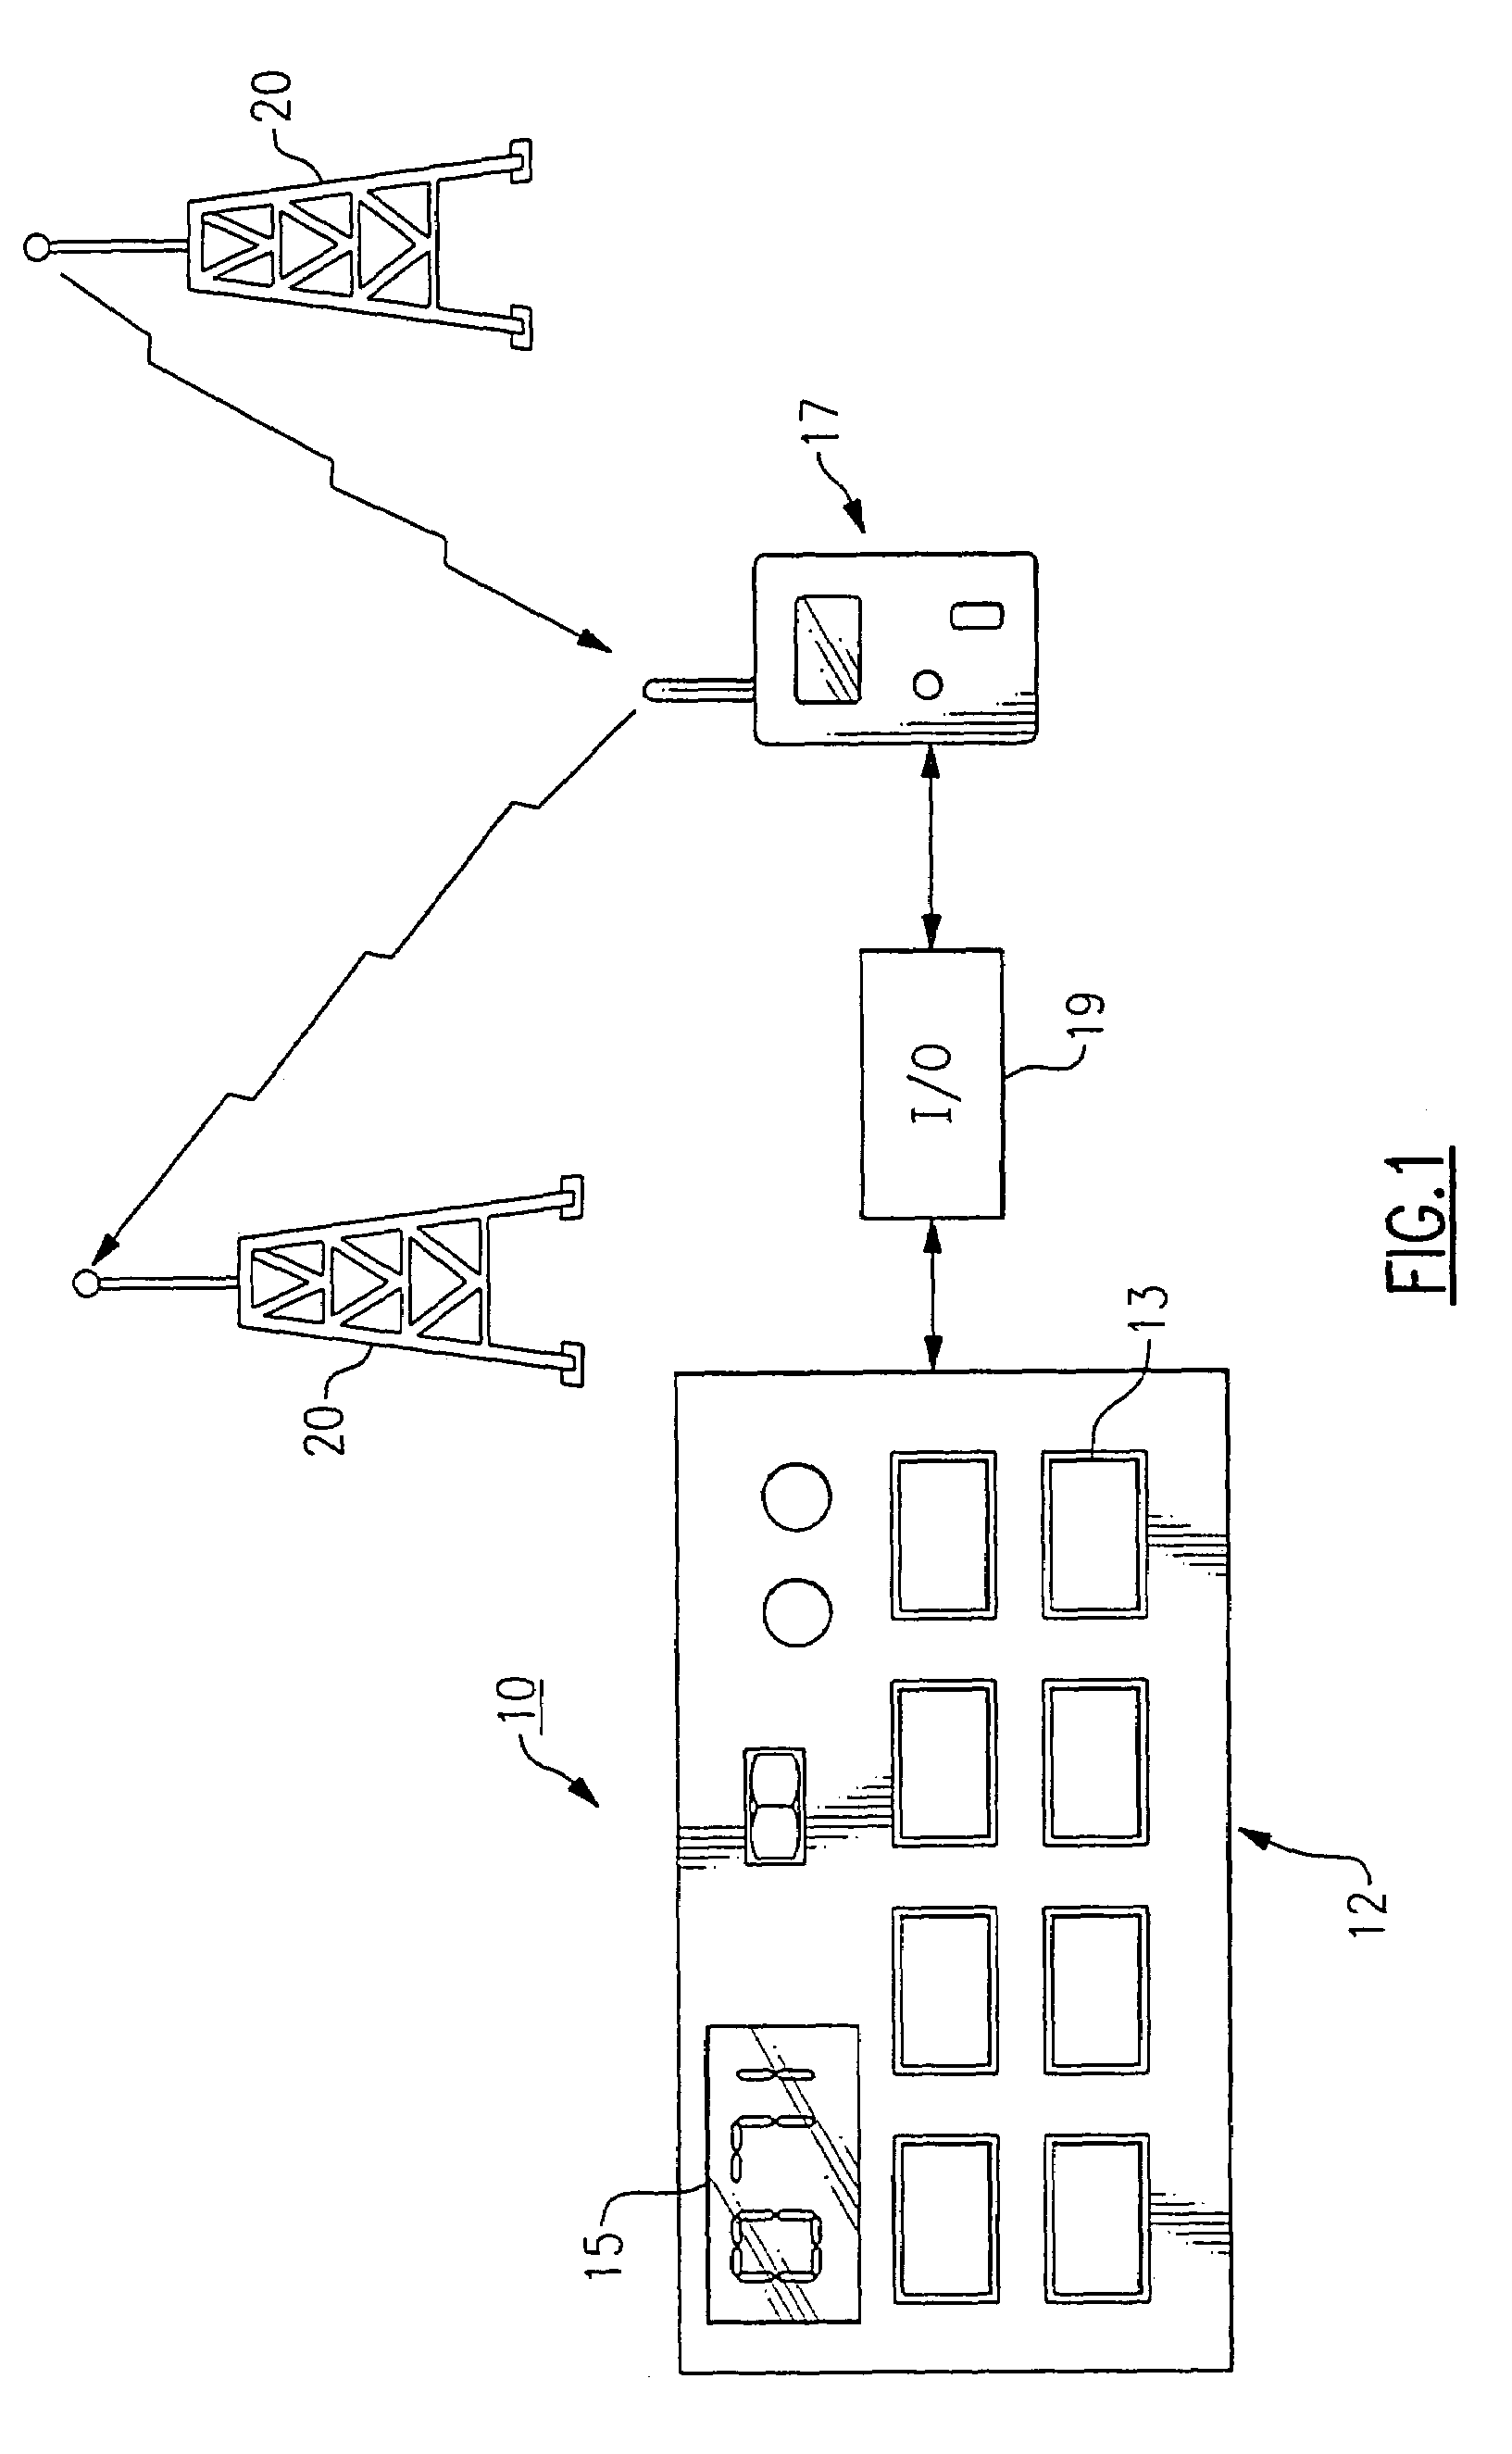 Method of setting the output power of a pager to aid in the installation of a wireless system